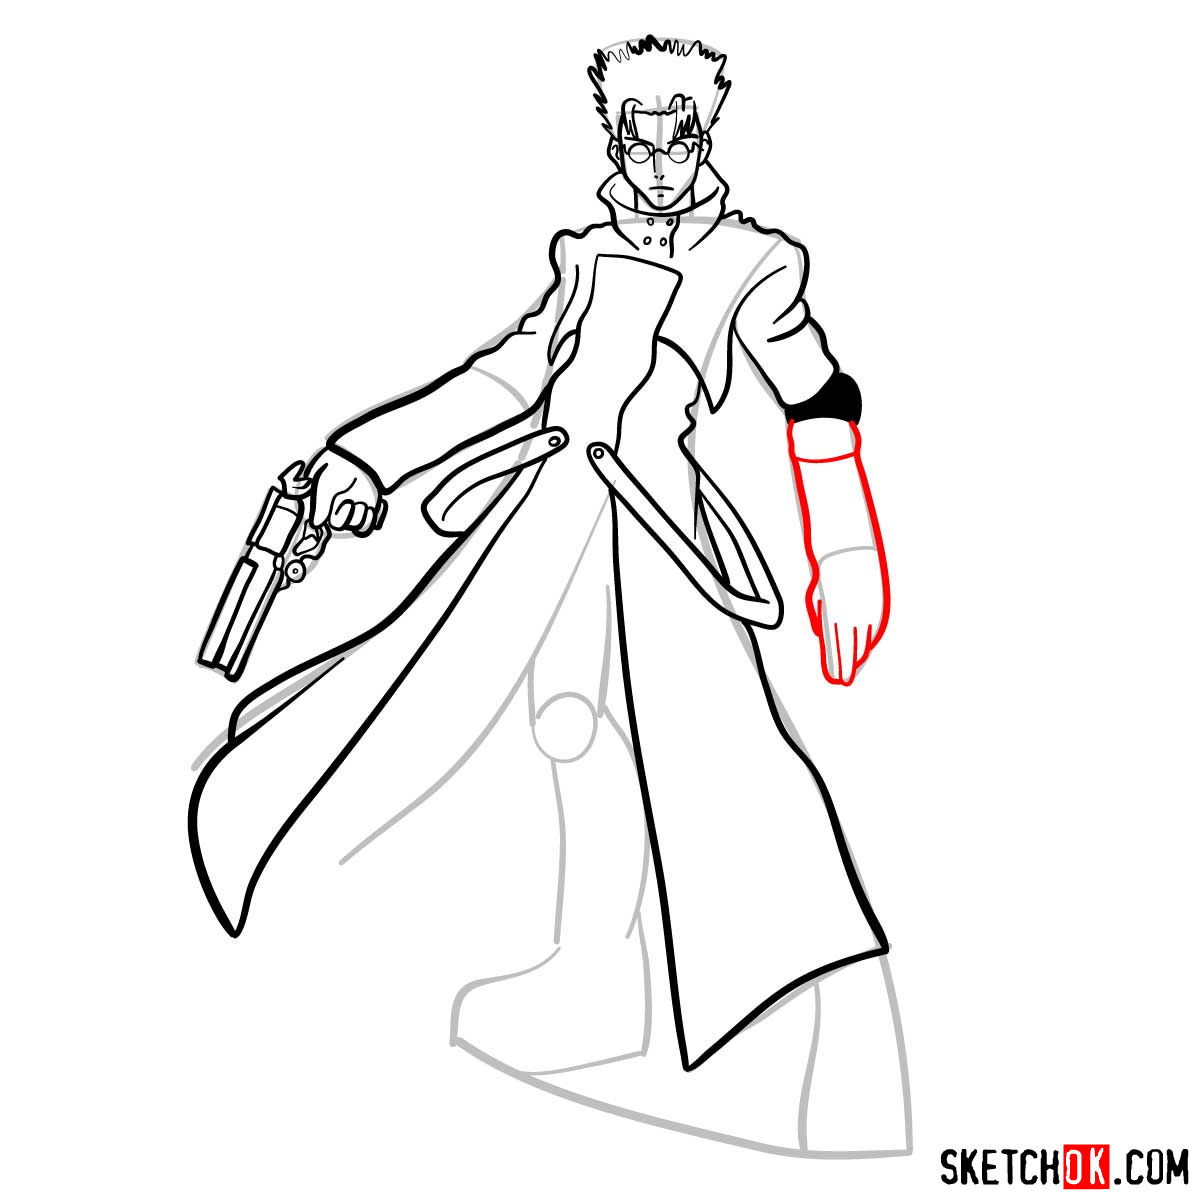 How to draw Vash the Stampede from Trigun anime - step 11